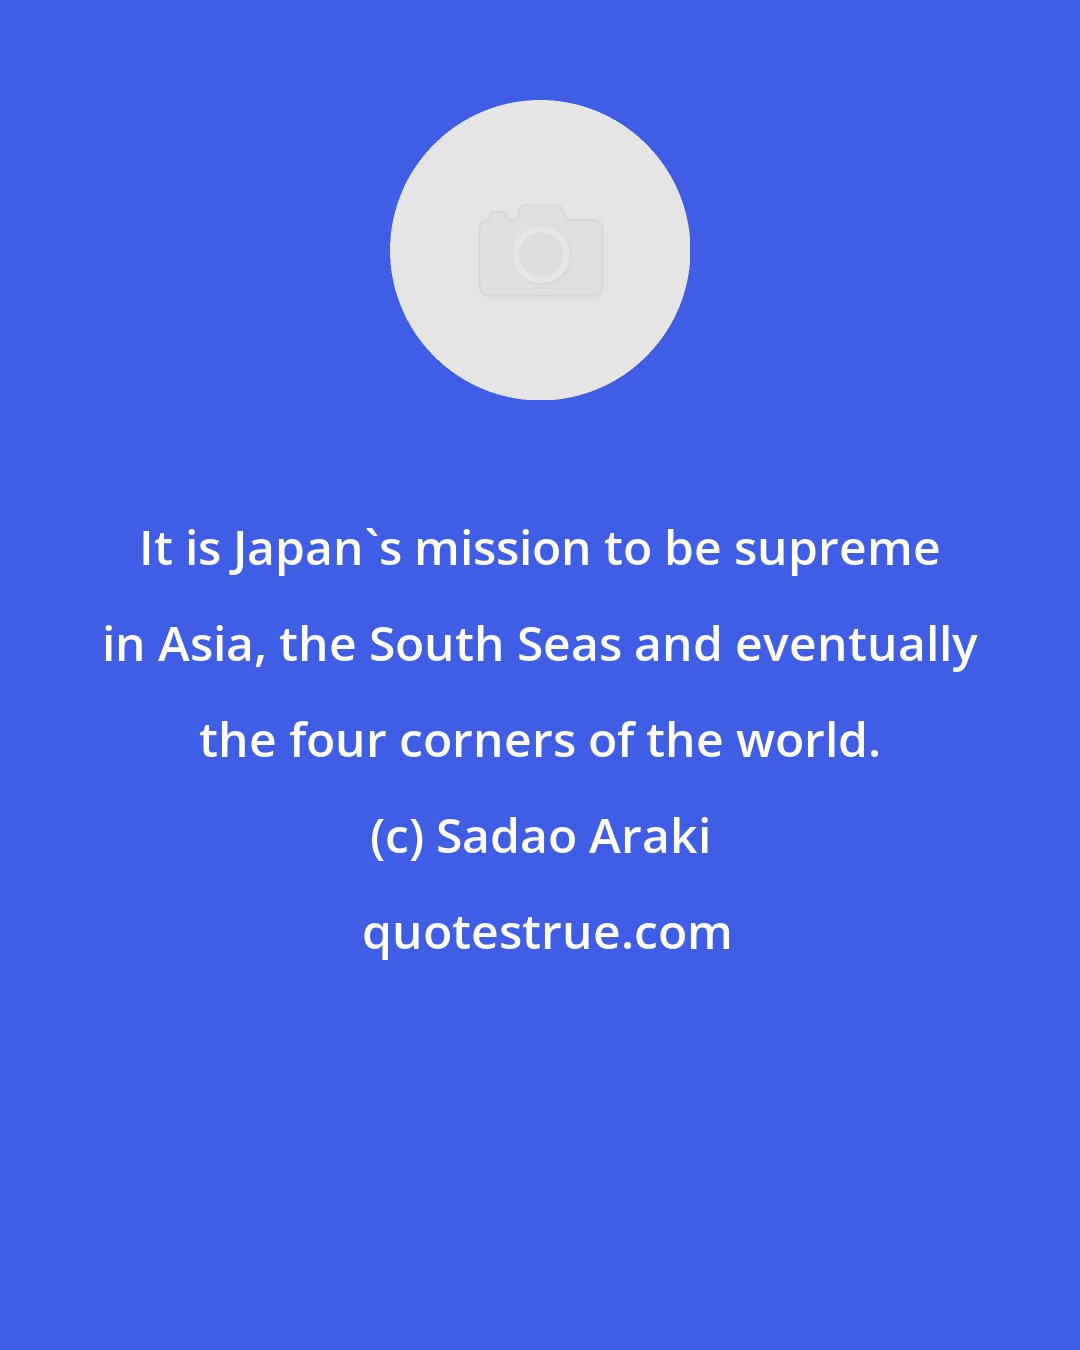 Sadao Araki: It is Japan's mission to be supreme in Asia, the South Seas and eventually the four corners of the world.